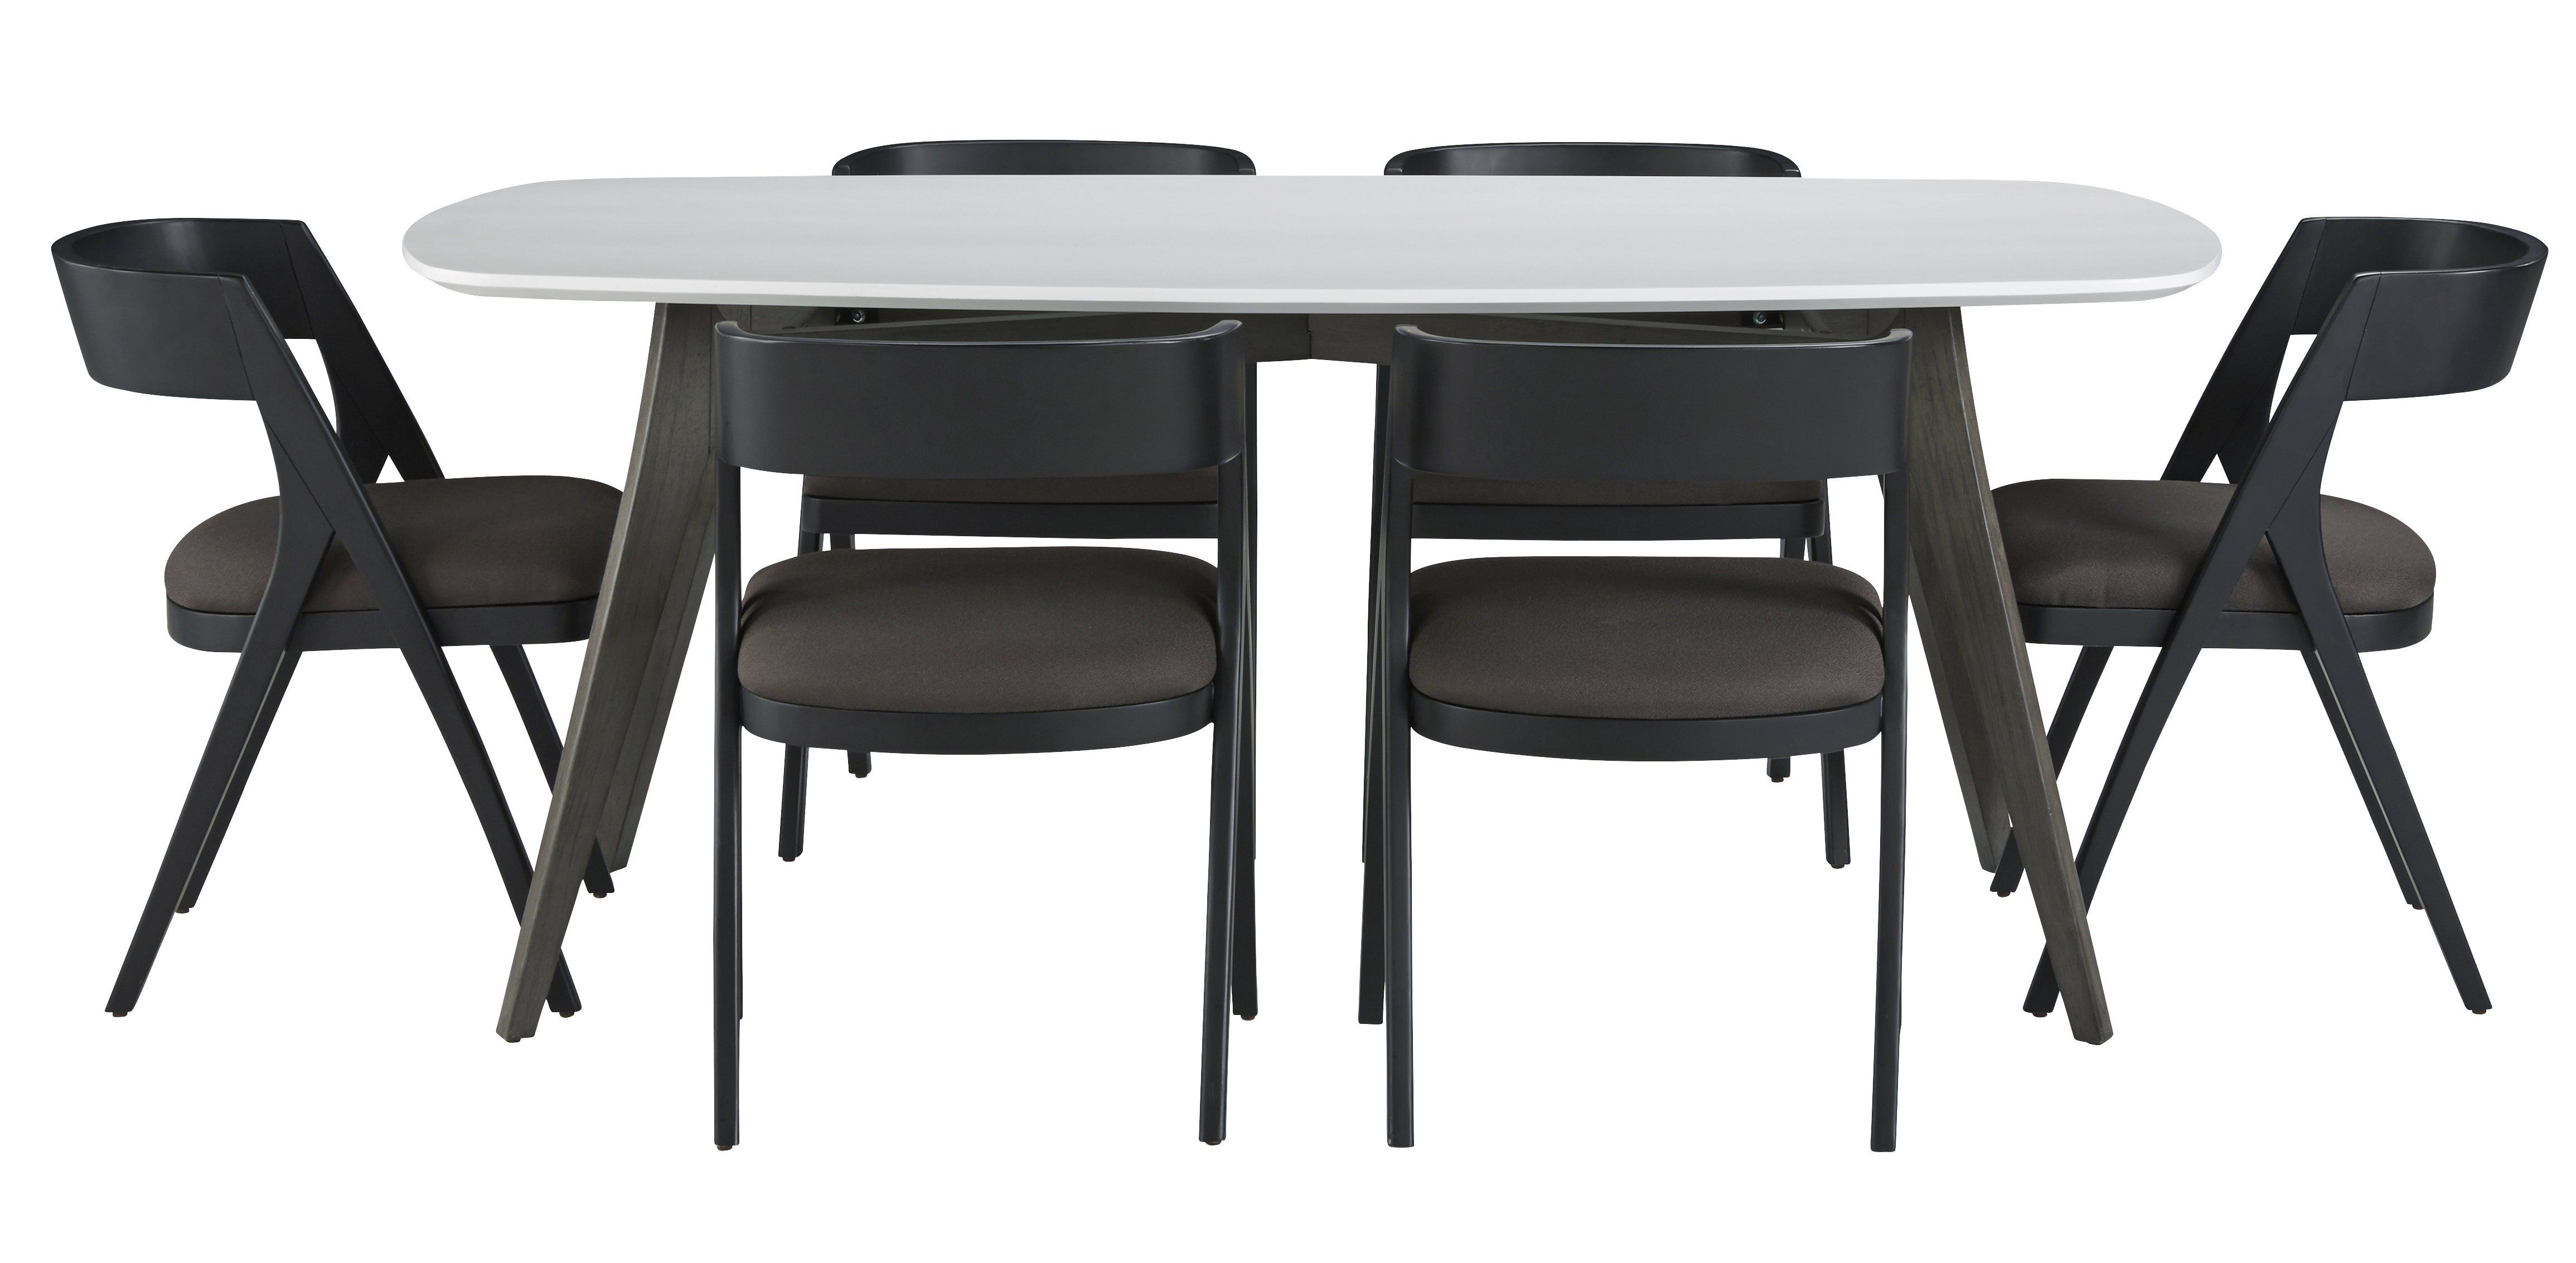 Dumfries 7 Piece Dining Set Intended For Best And Newest Frida 3 Piece Dining Table Sets (View 4 of 20)